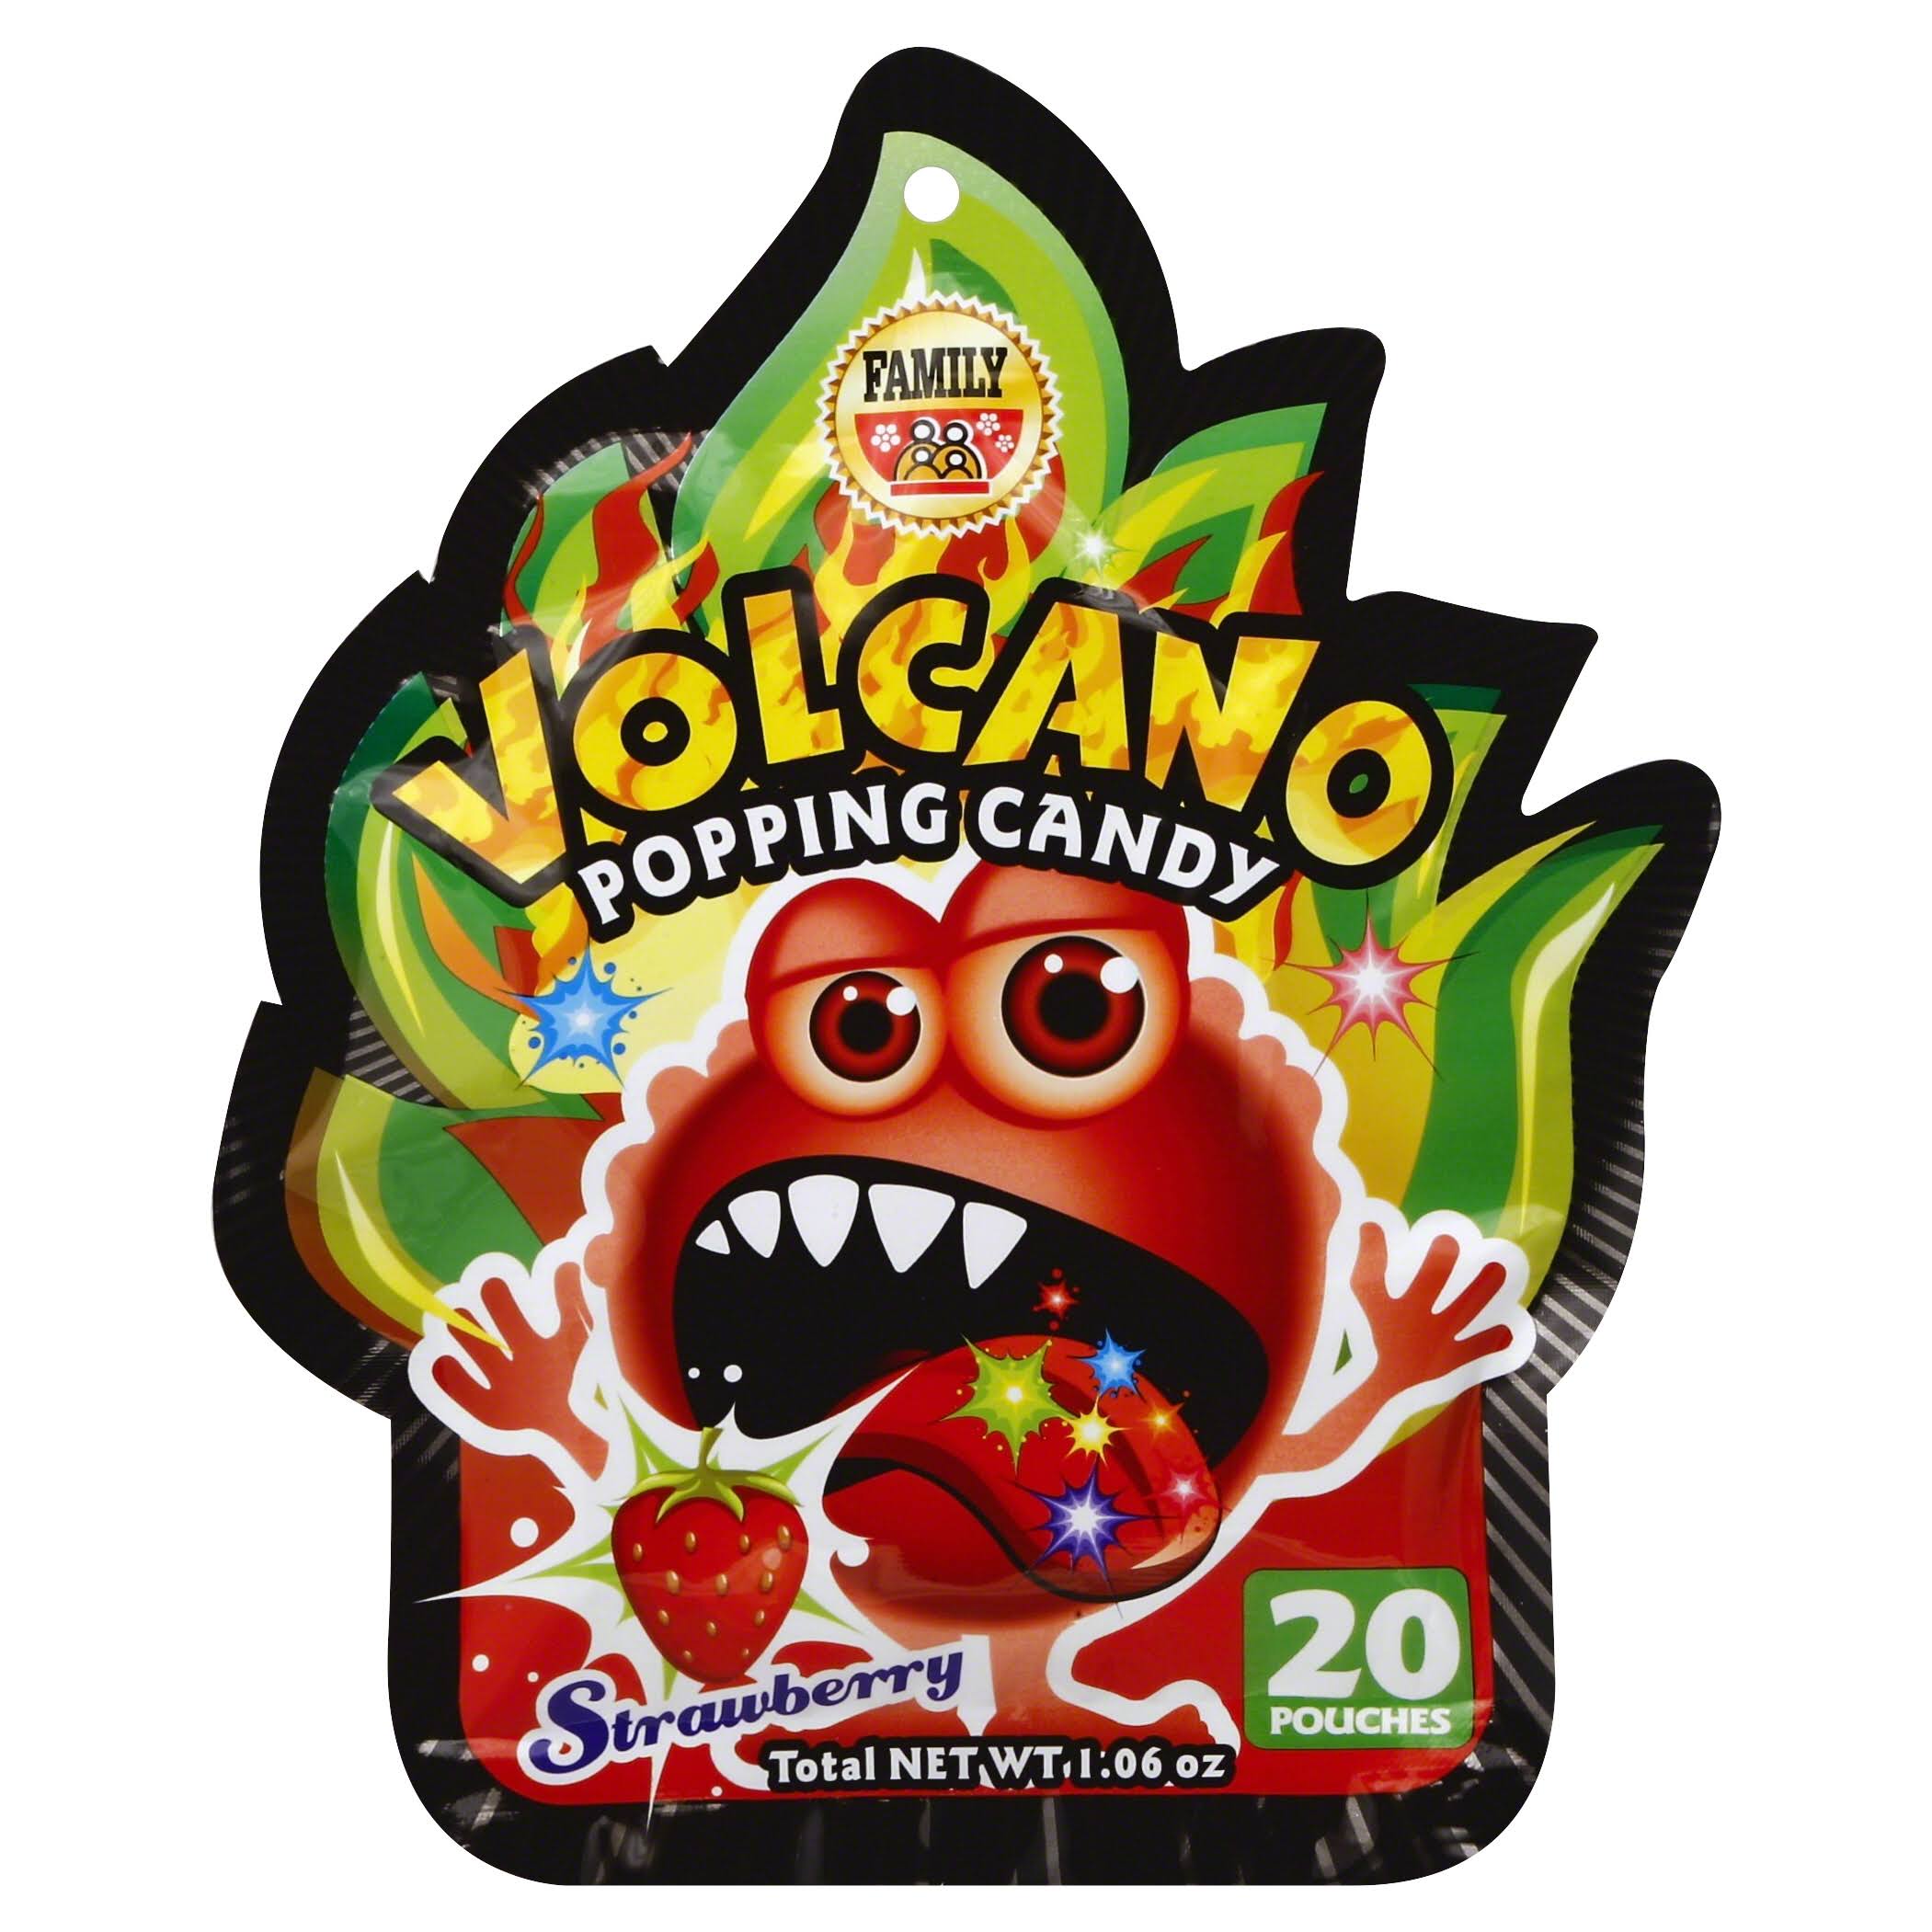 Family Volcano Popping Candy - Strawberry, 20ct